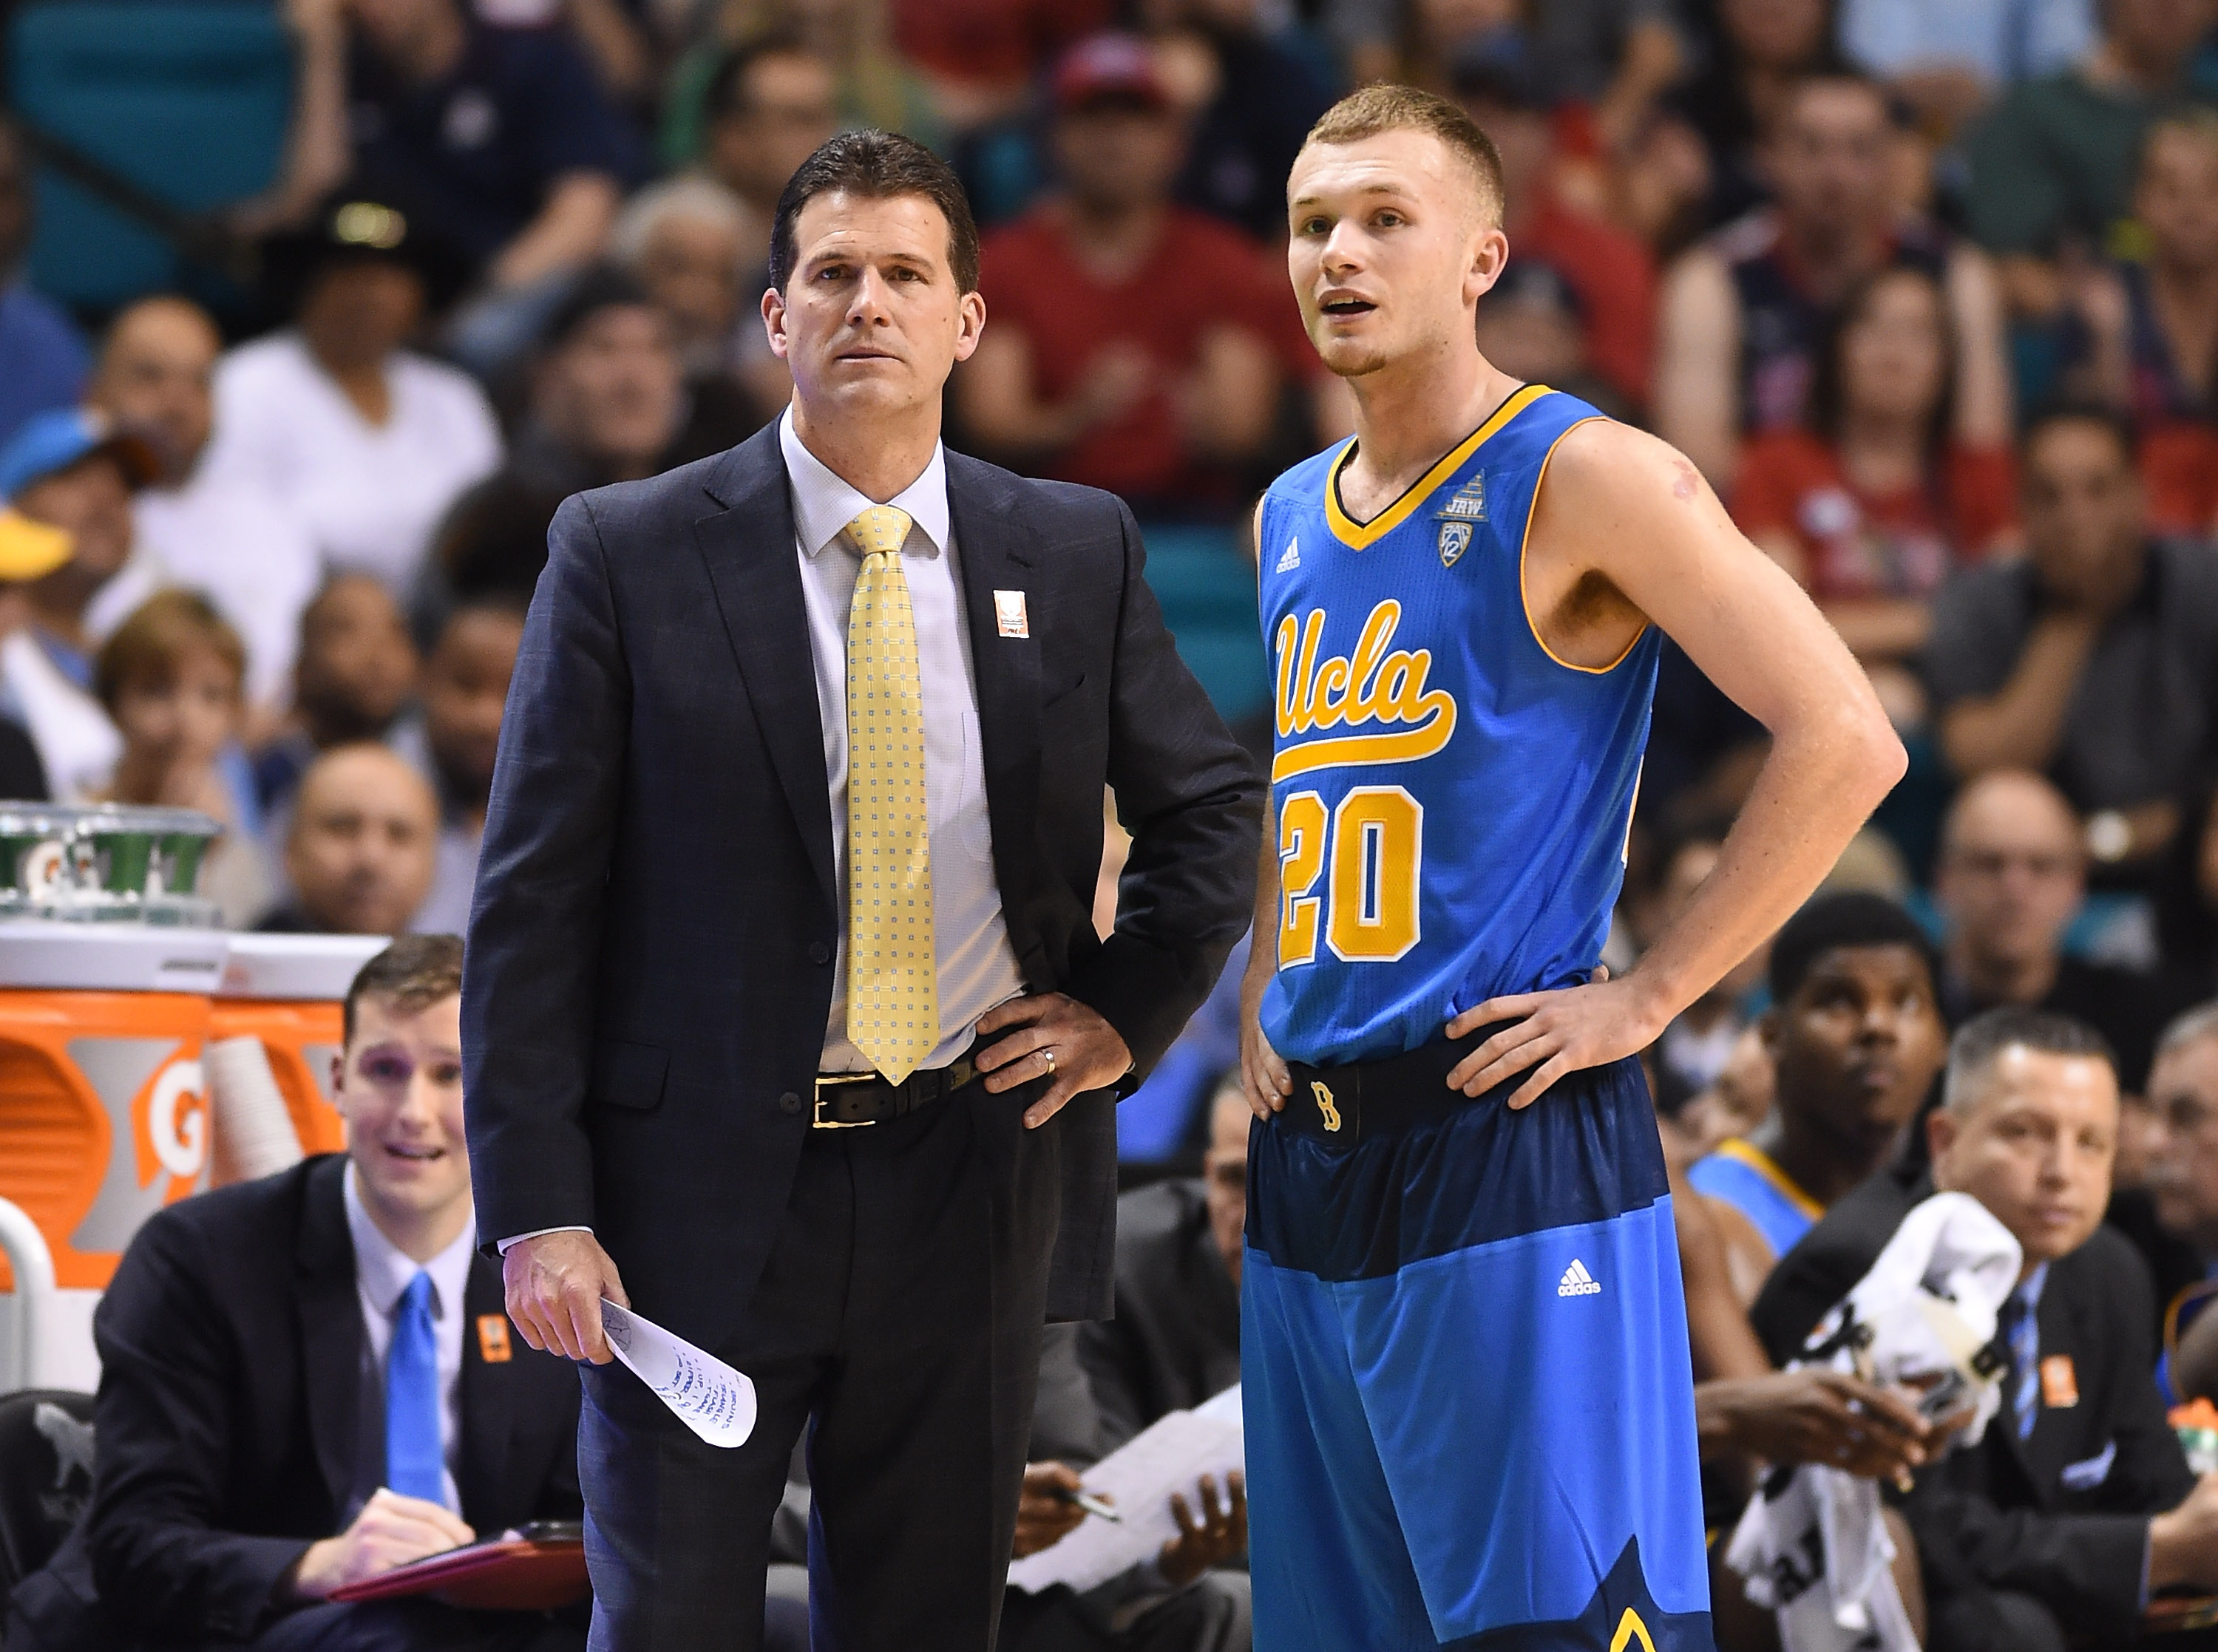 Bryce and Steve Alford, Ethan Miller/Getty Images